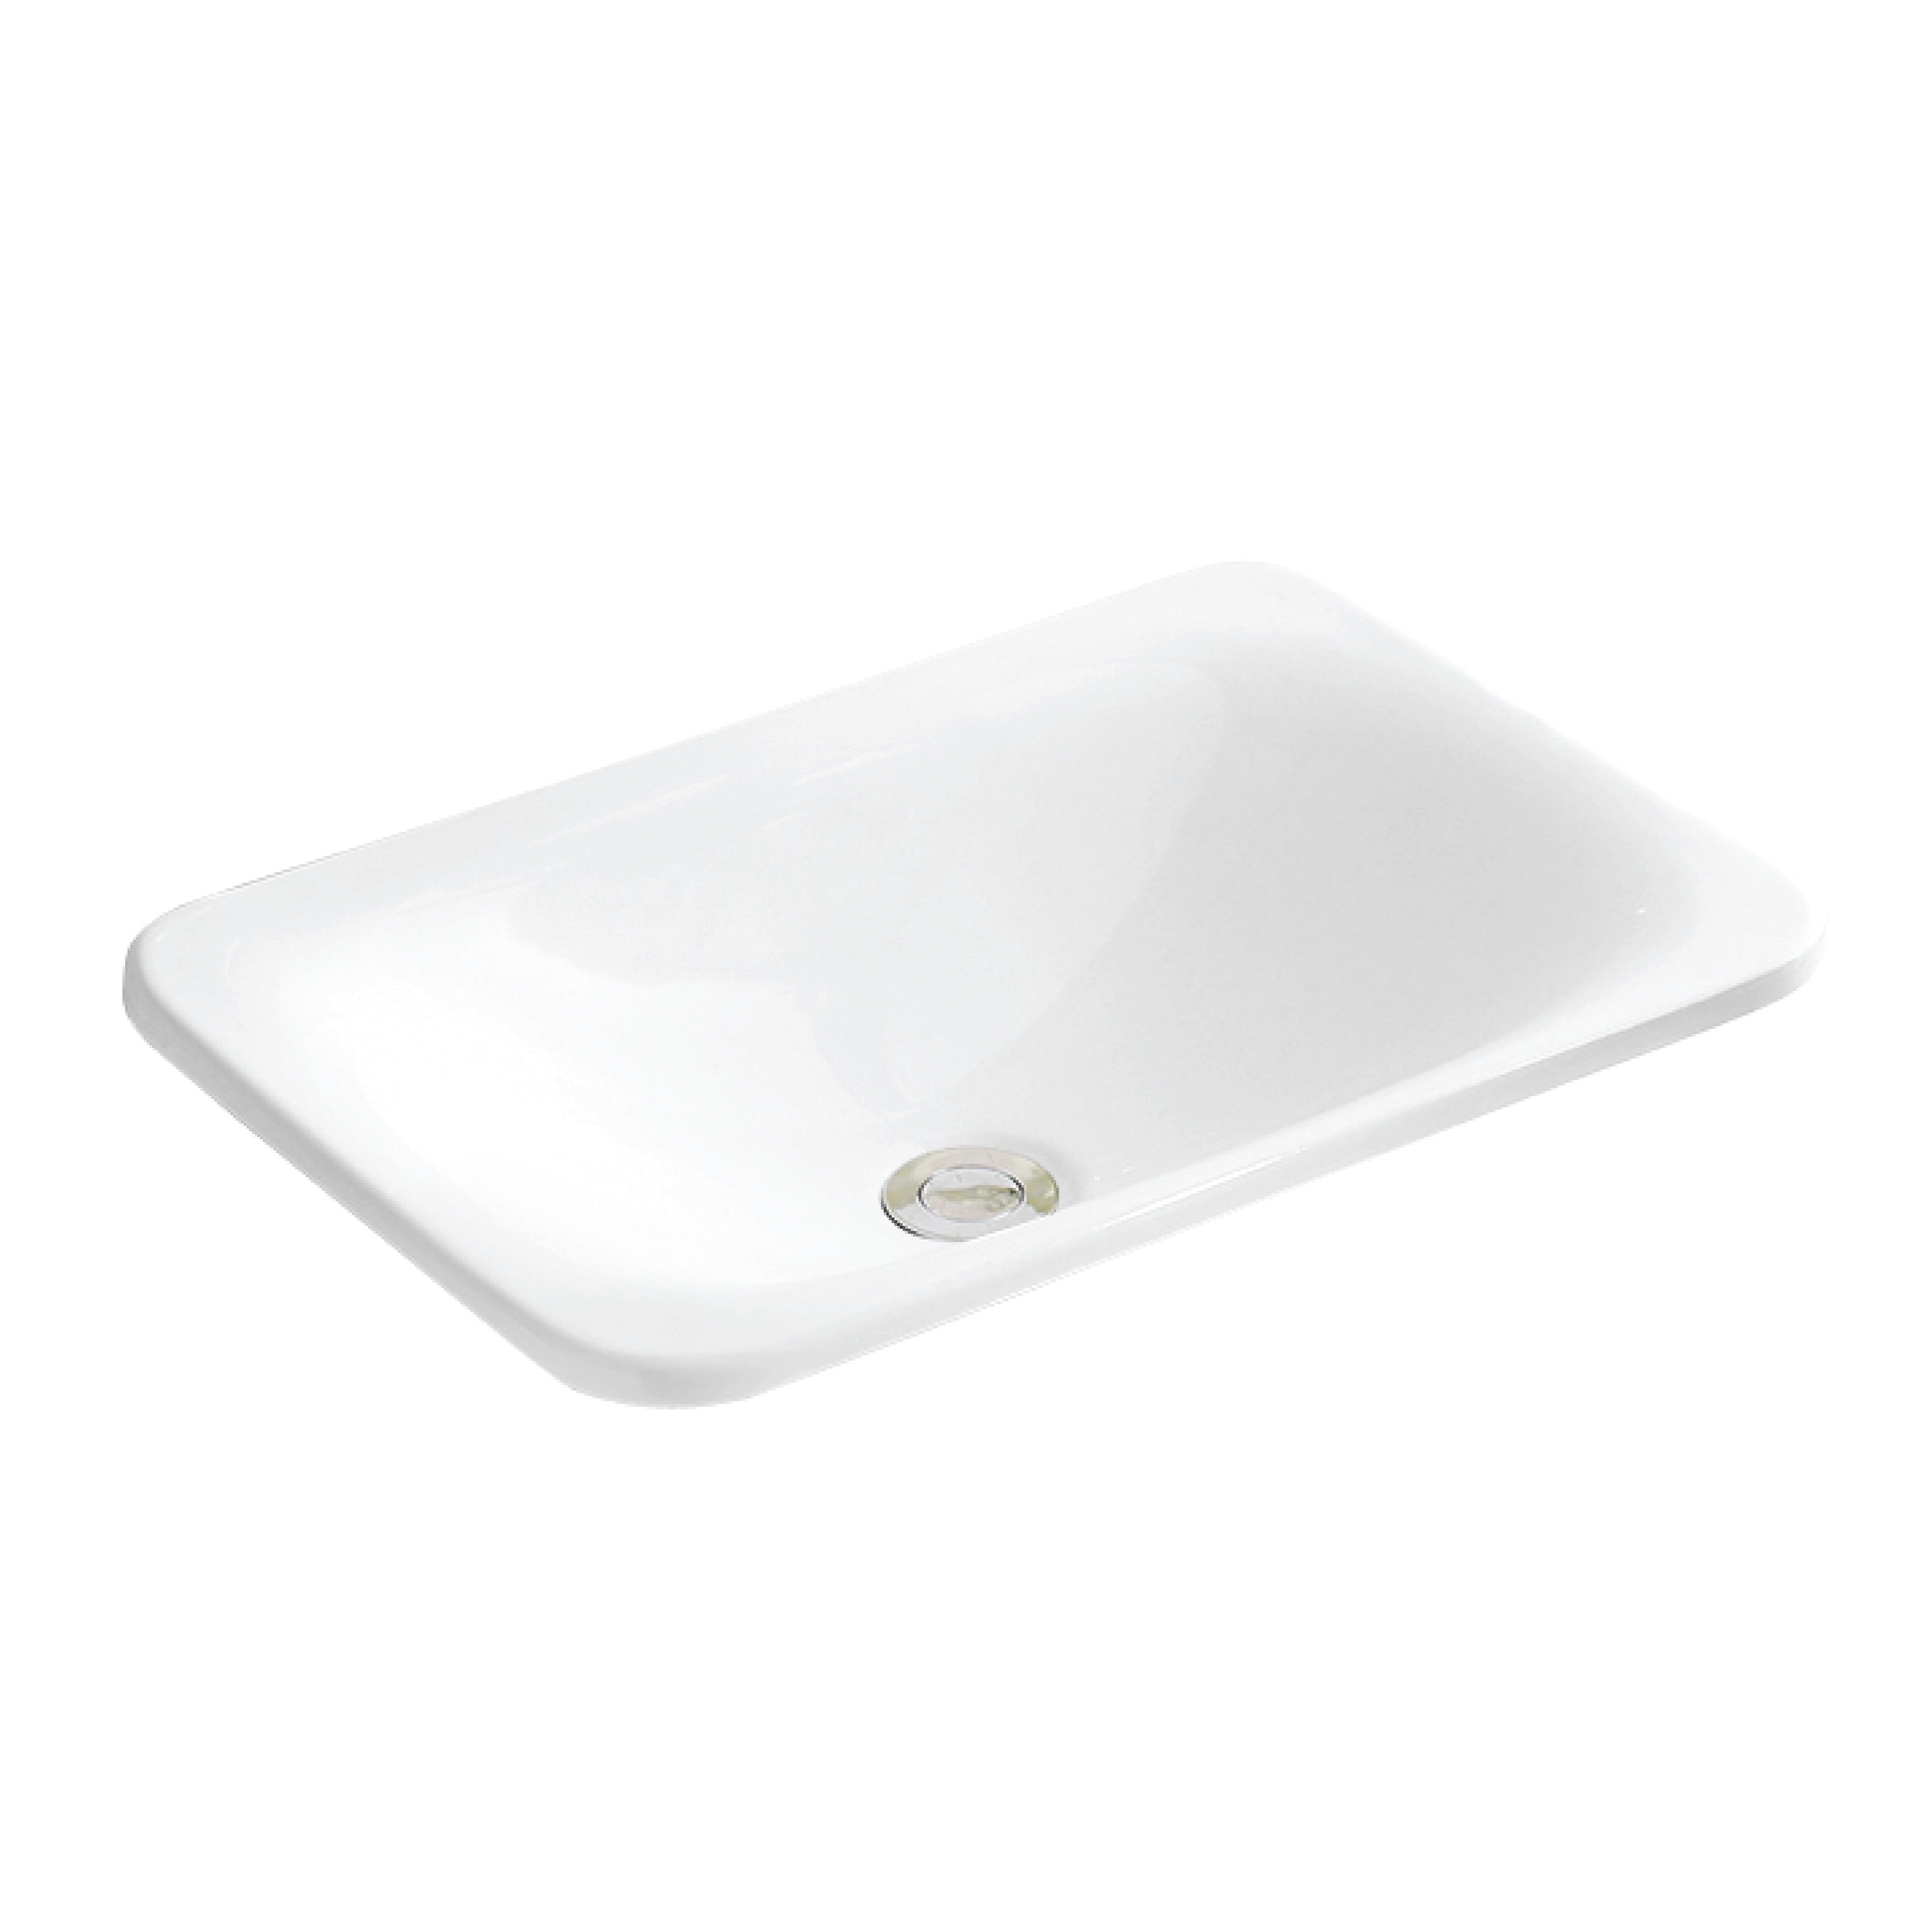 allen + roth White Drop-In Rectangular Traditional Bathroom Sink (21.26-in  x 18.5-in) at